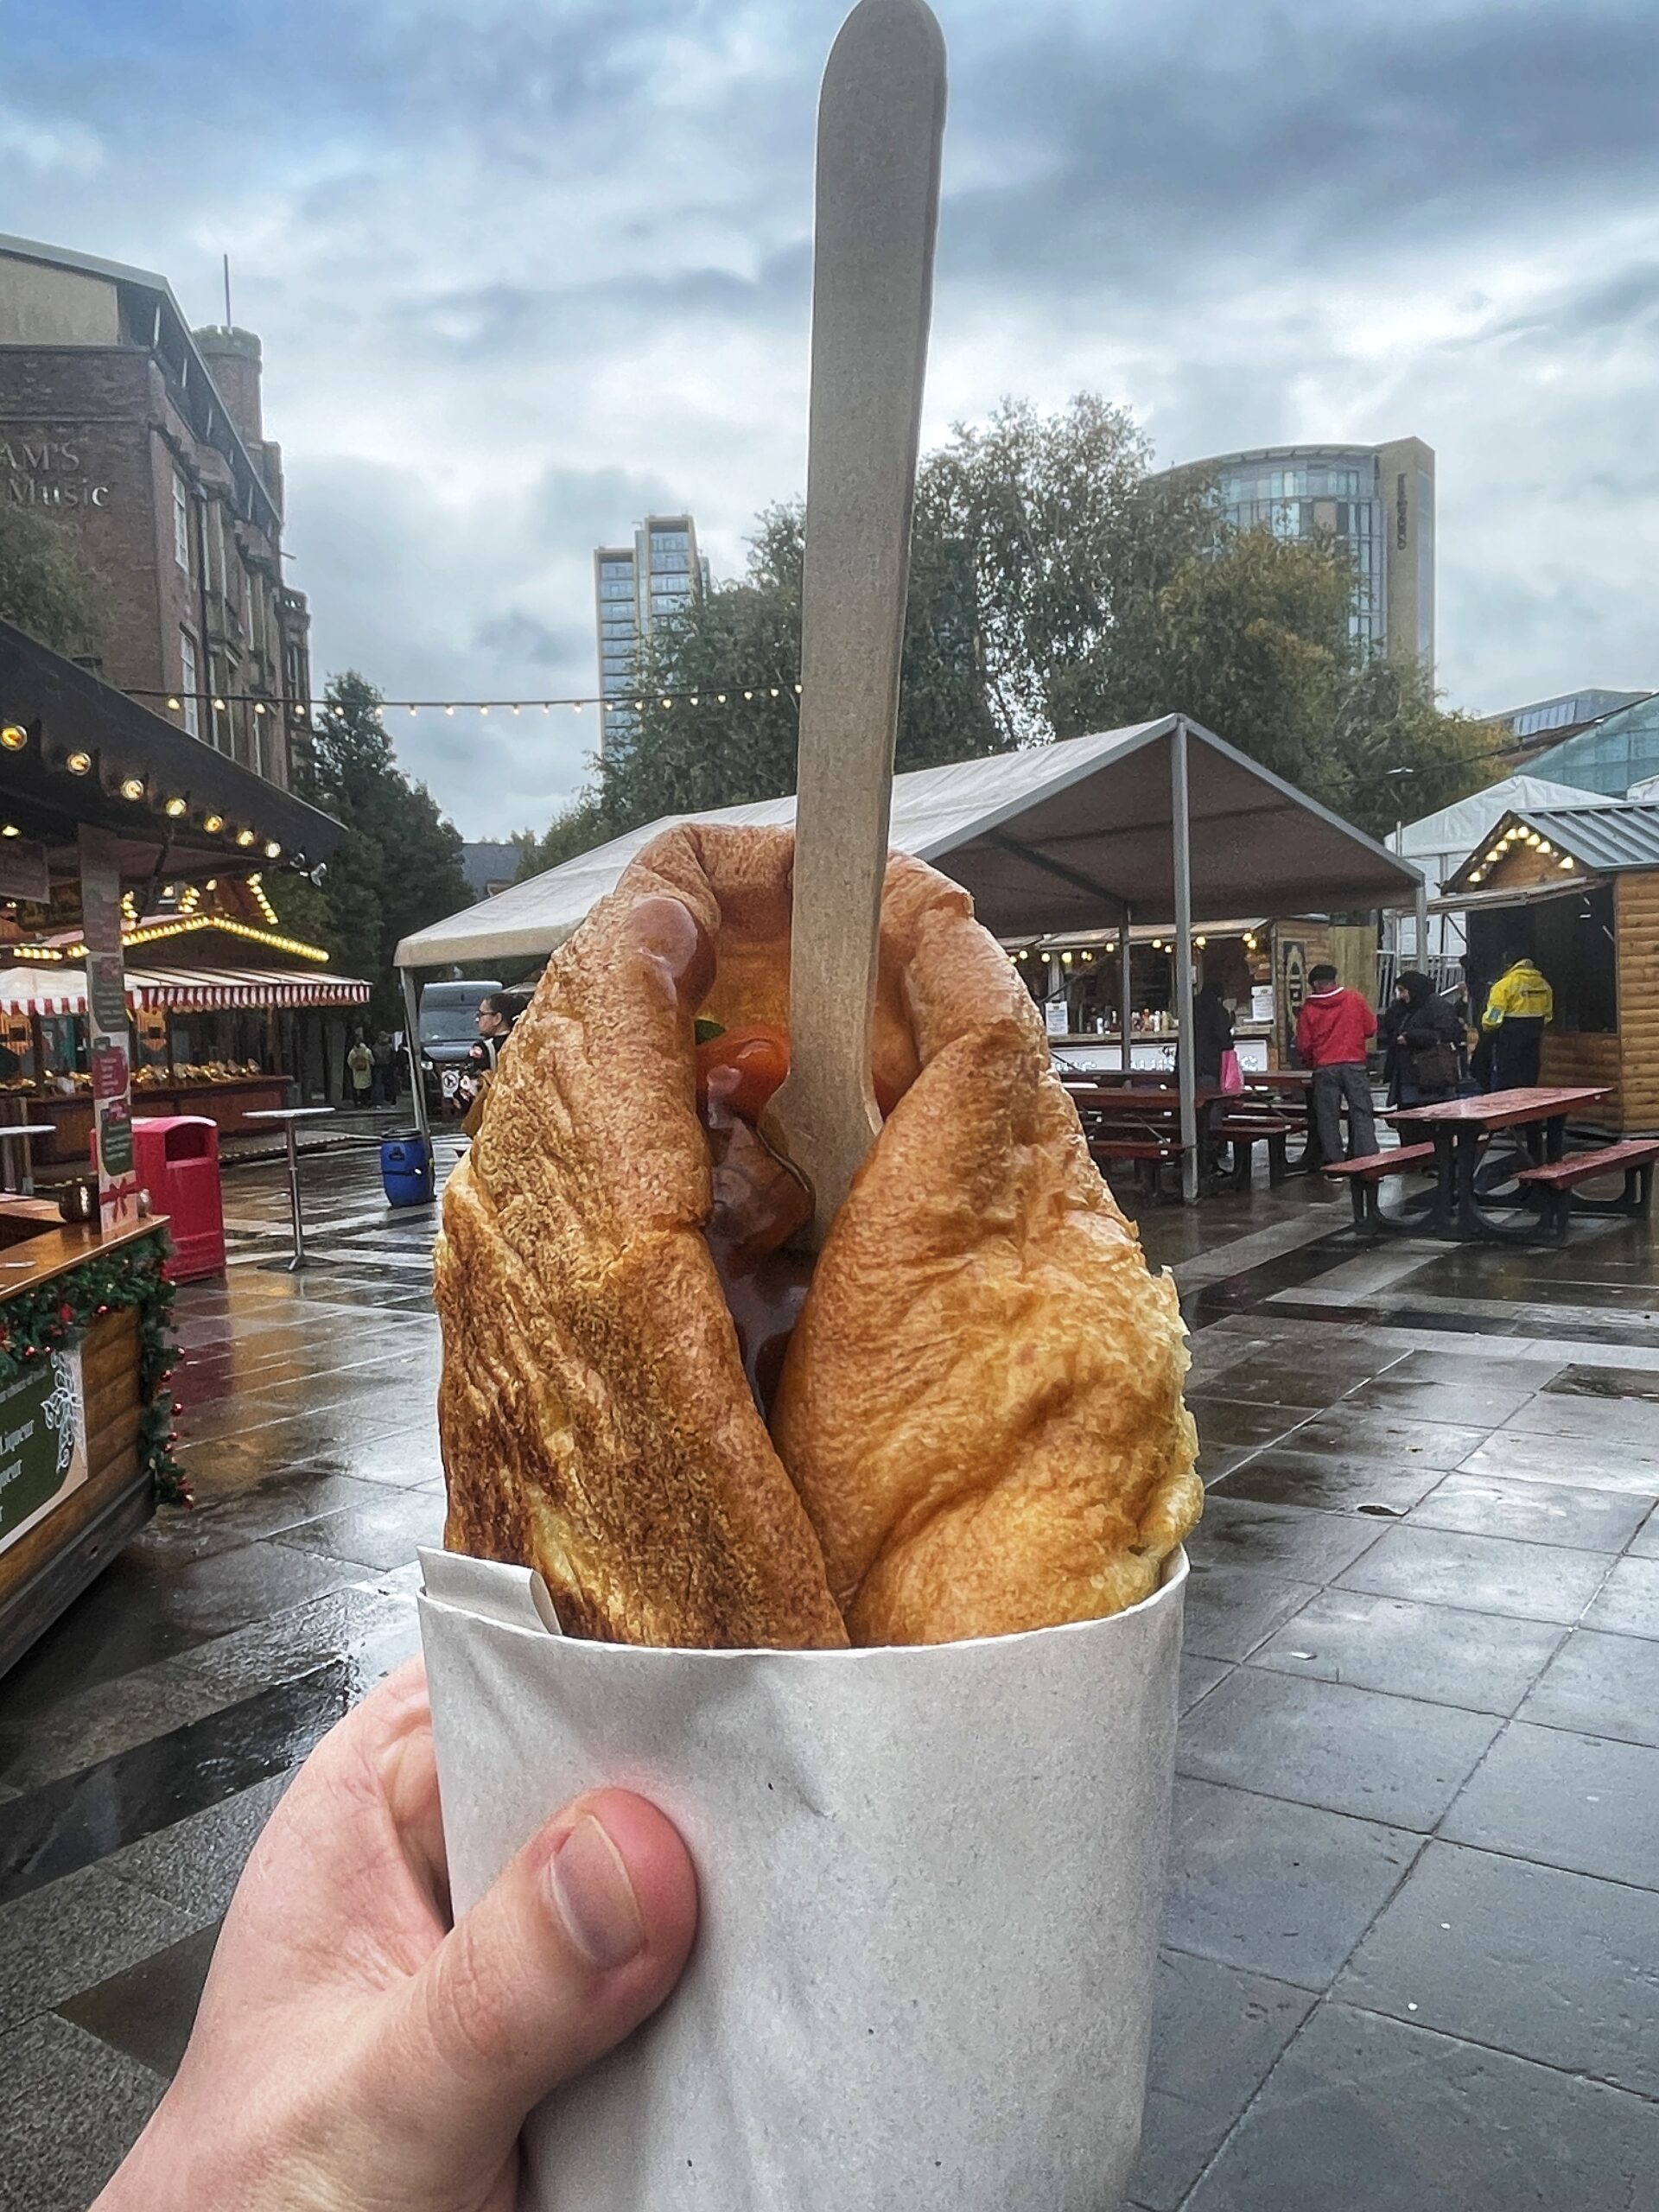 Yorkshire Pudding Wraps are always sell-out successes at the Christmas Markets